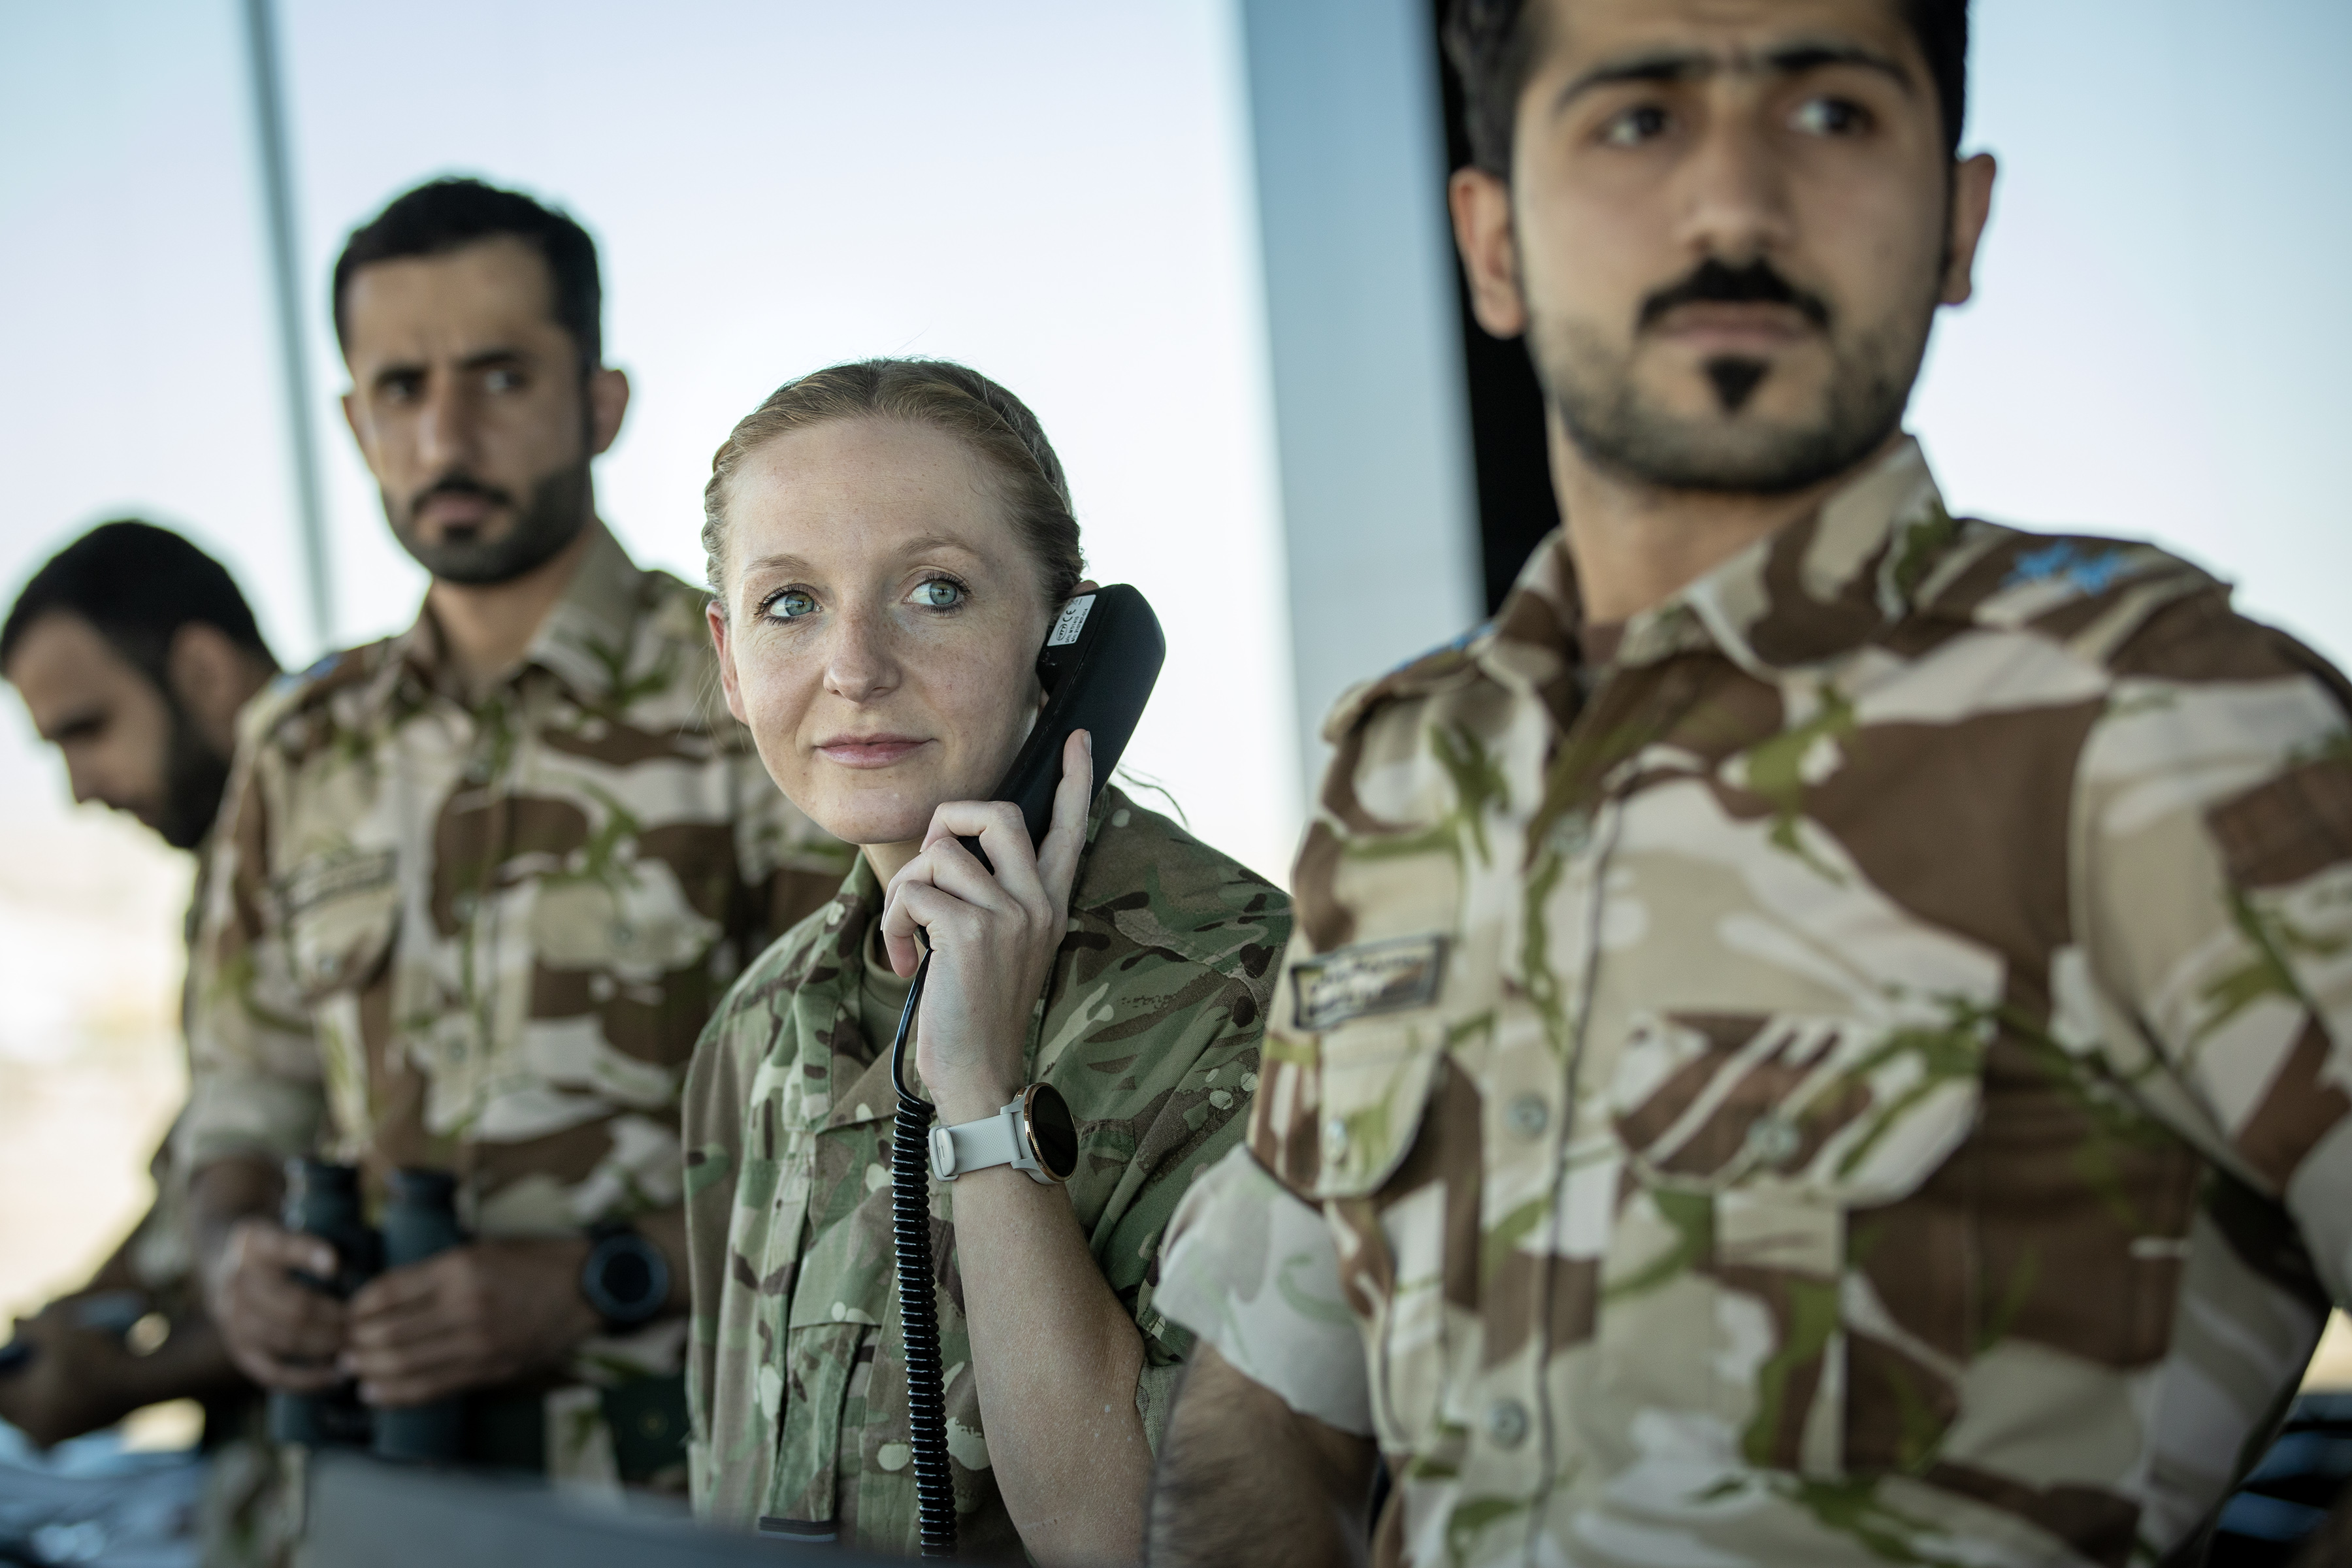 Image shows personnel with telephones.